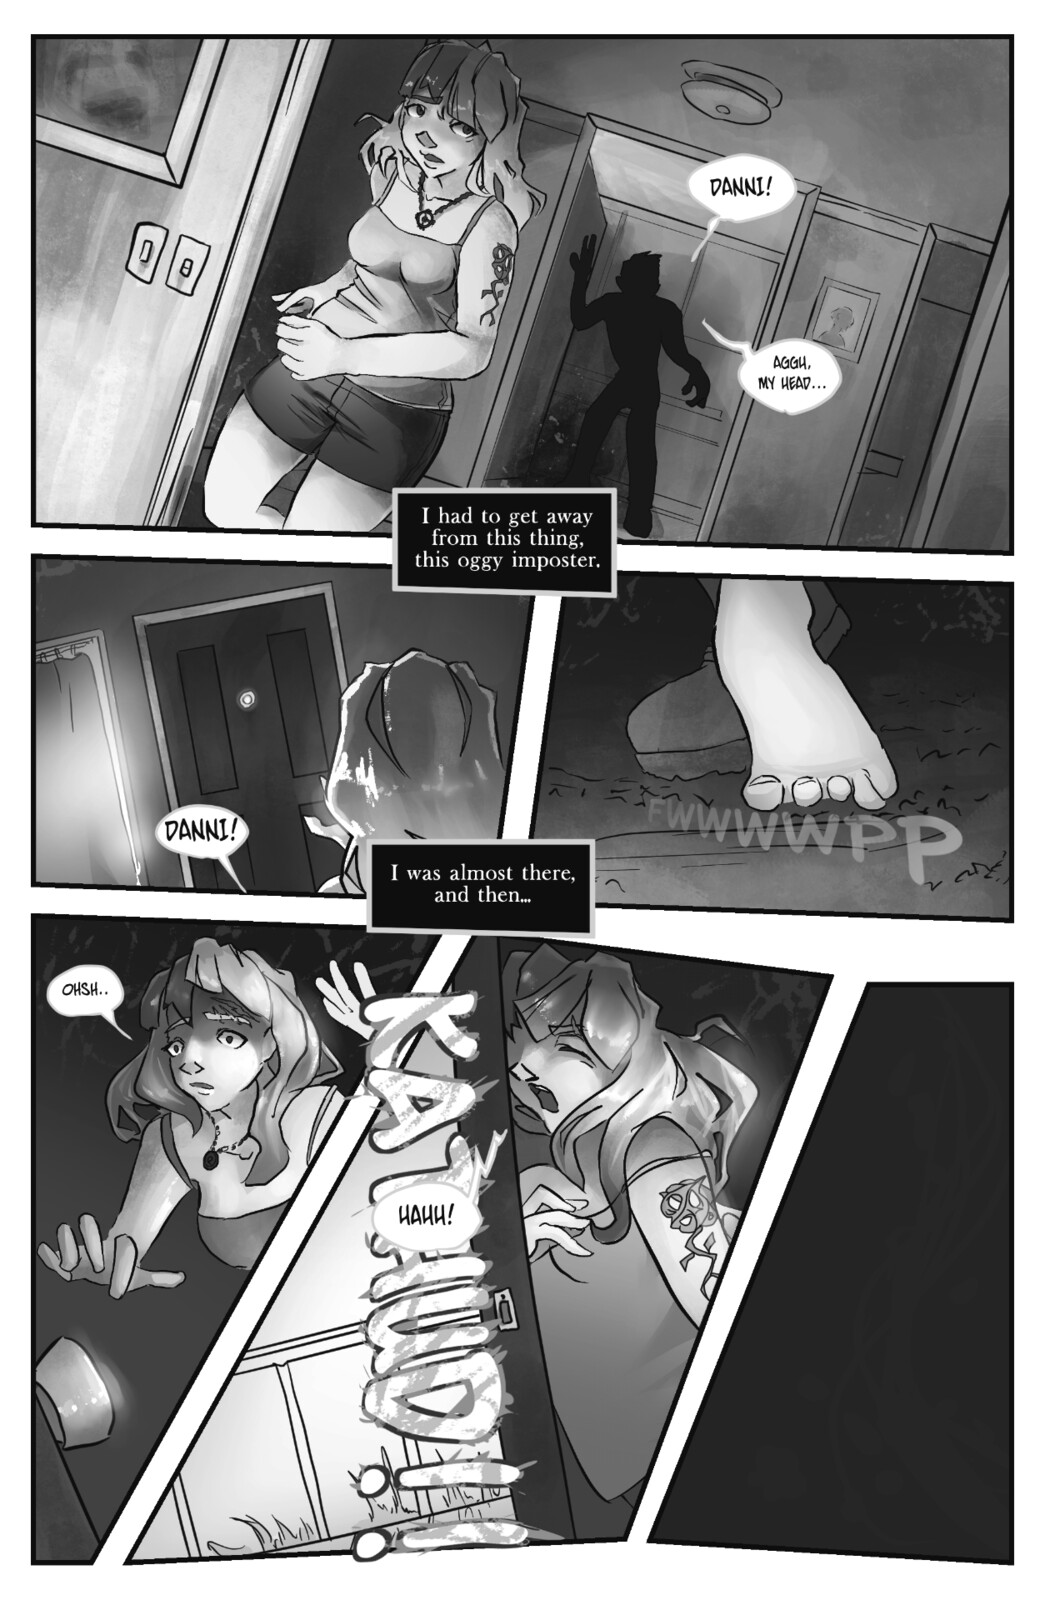 A page from the Sideways Graphic Novel